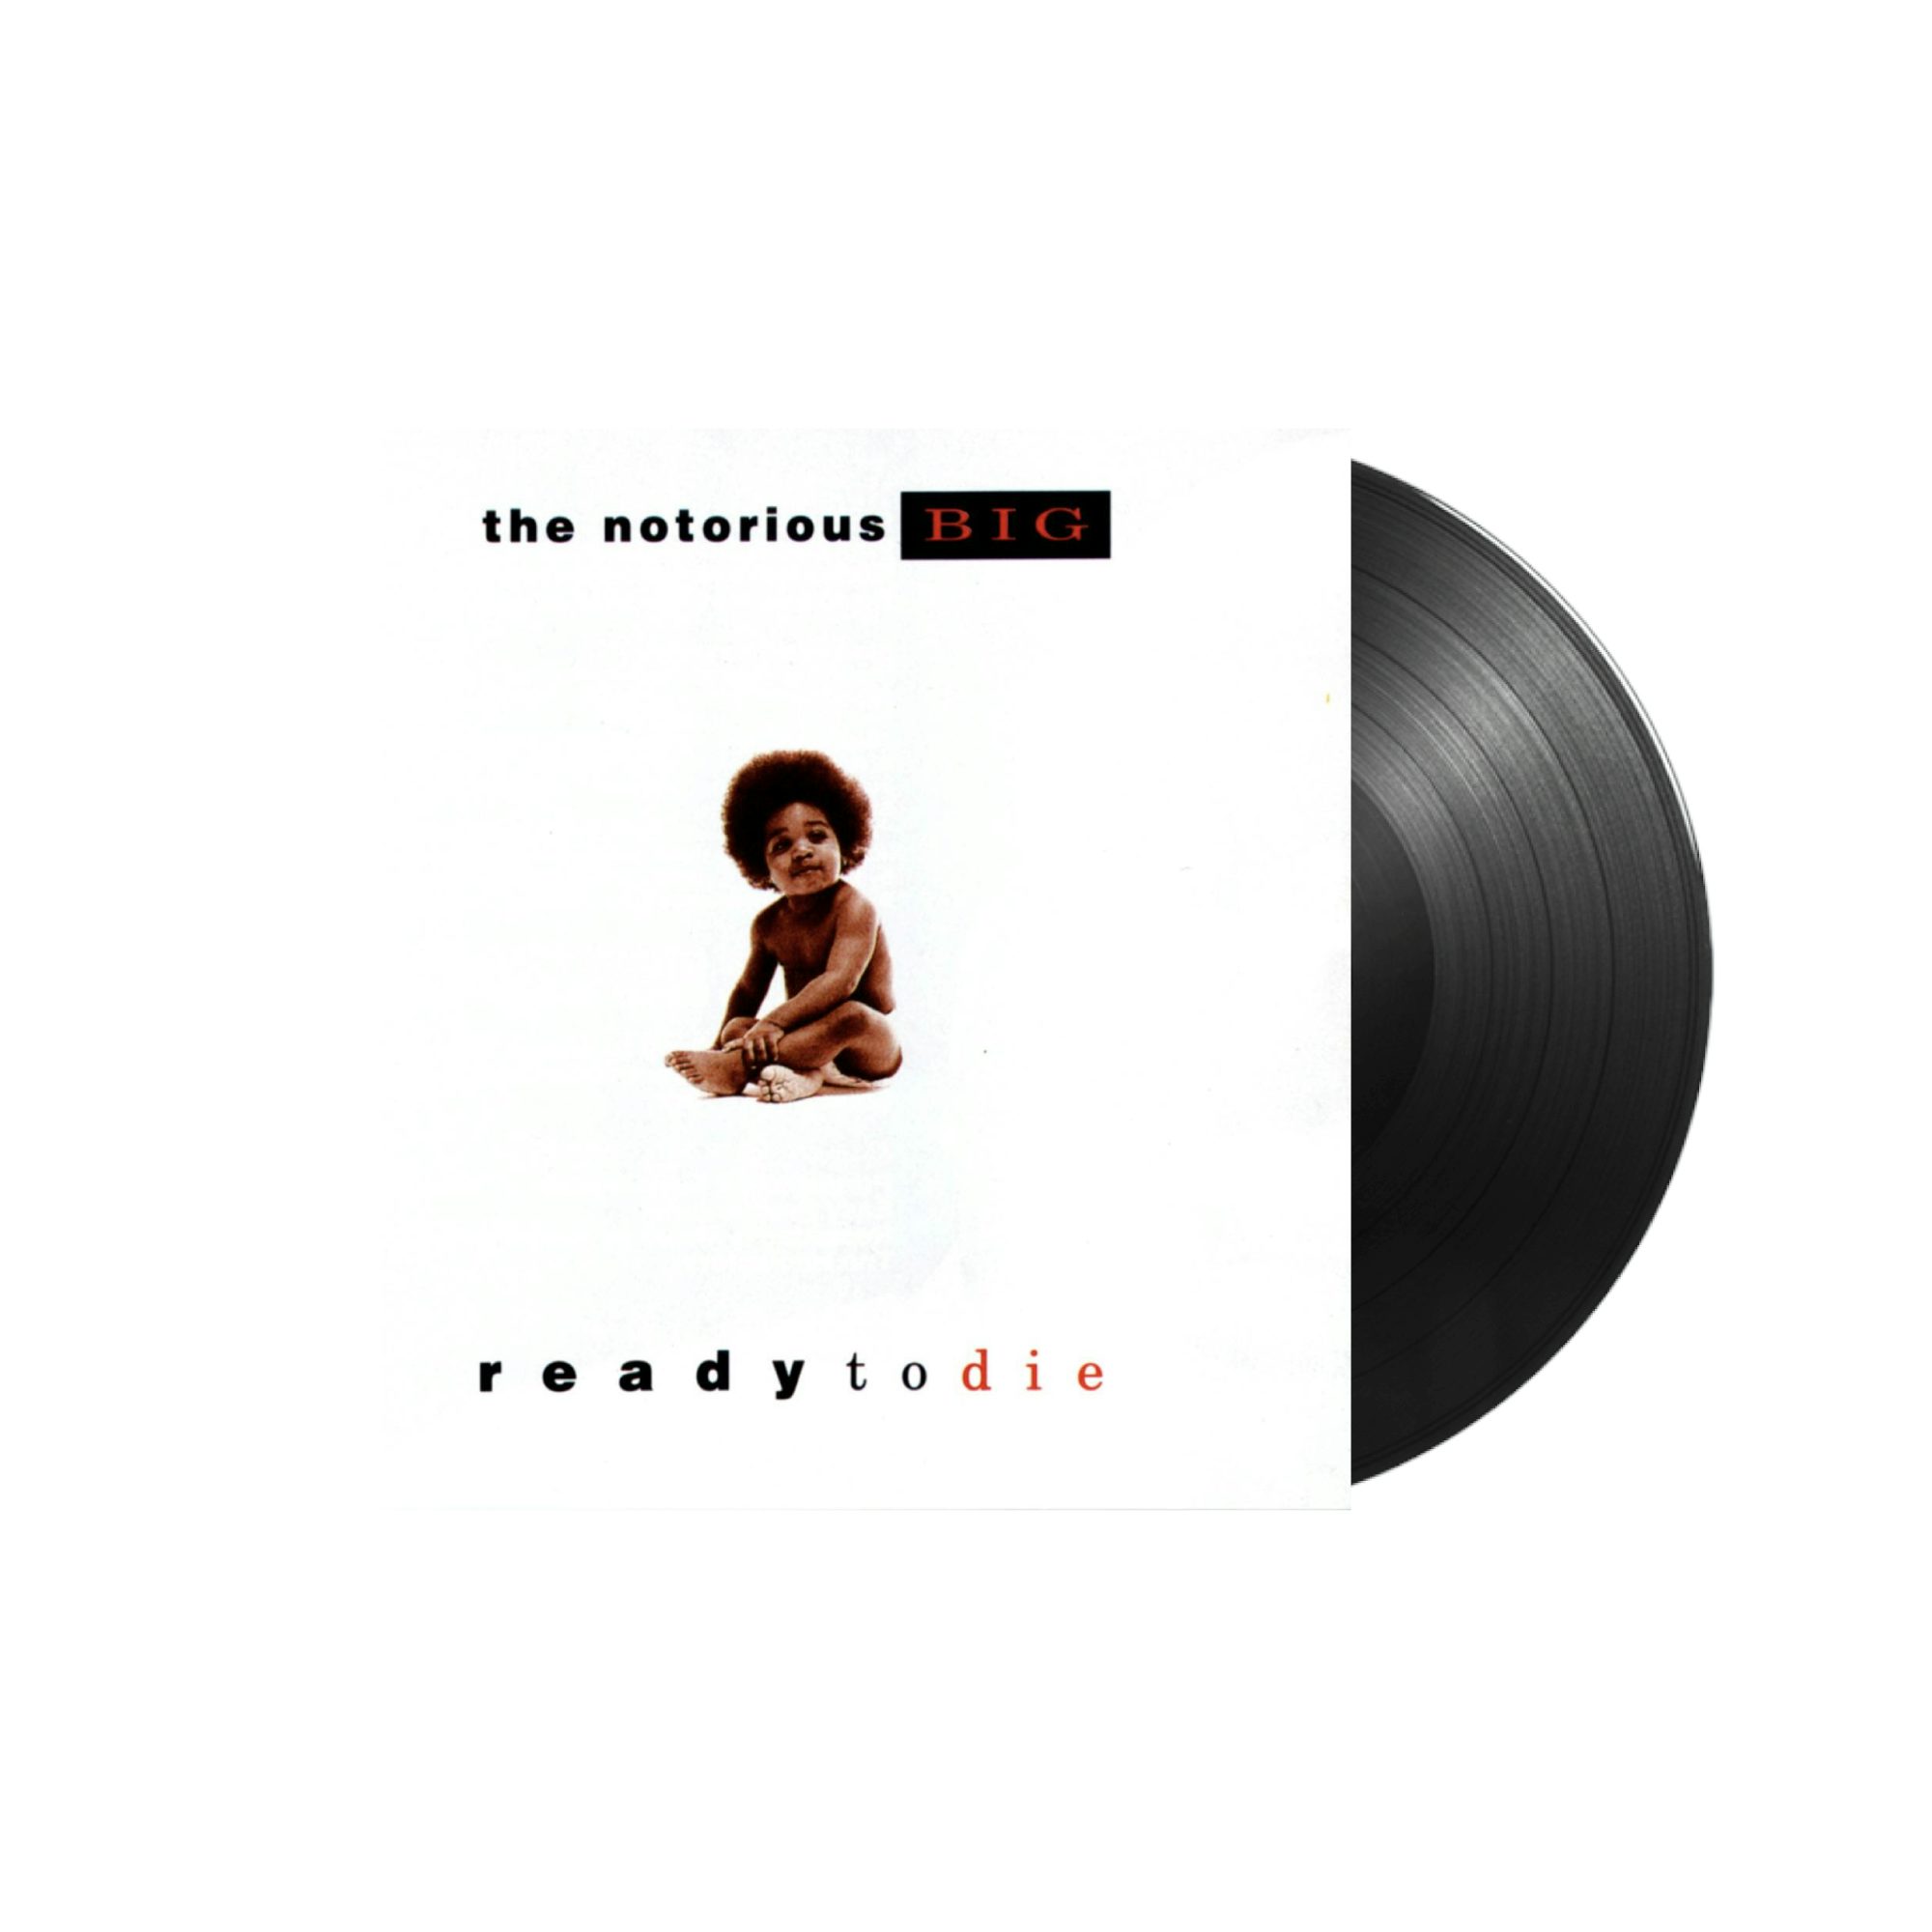 The Notorious B.I.G. – Ready To Die LP | www.fitwellind.com